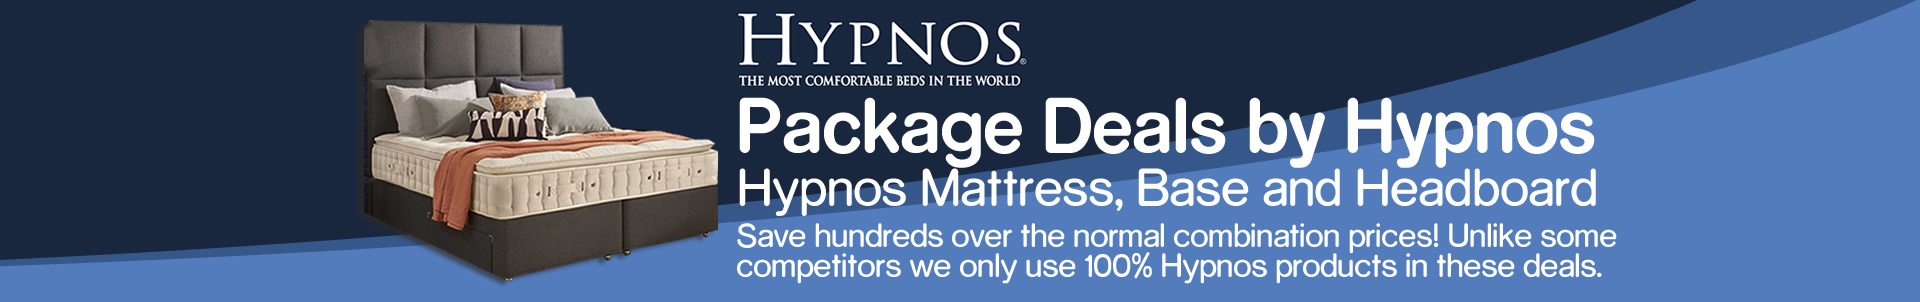 Hypnos Package Deals